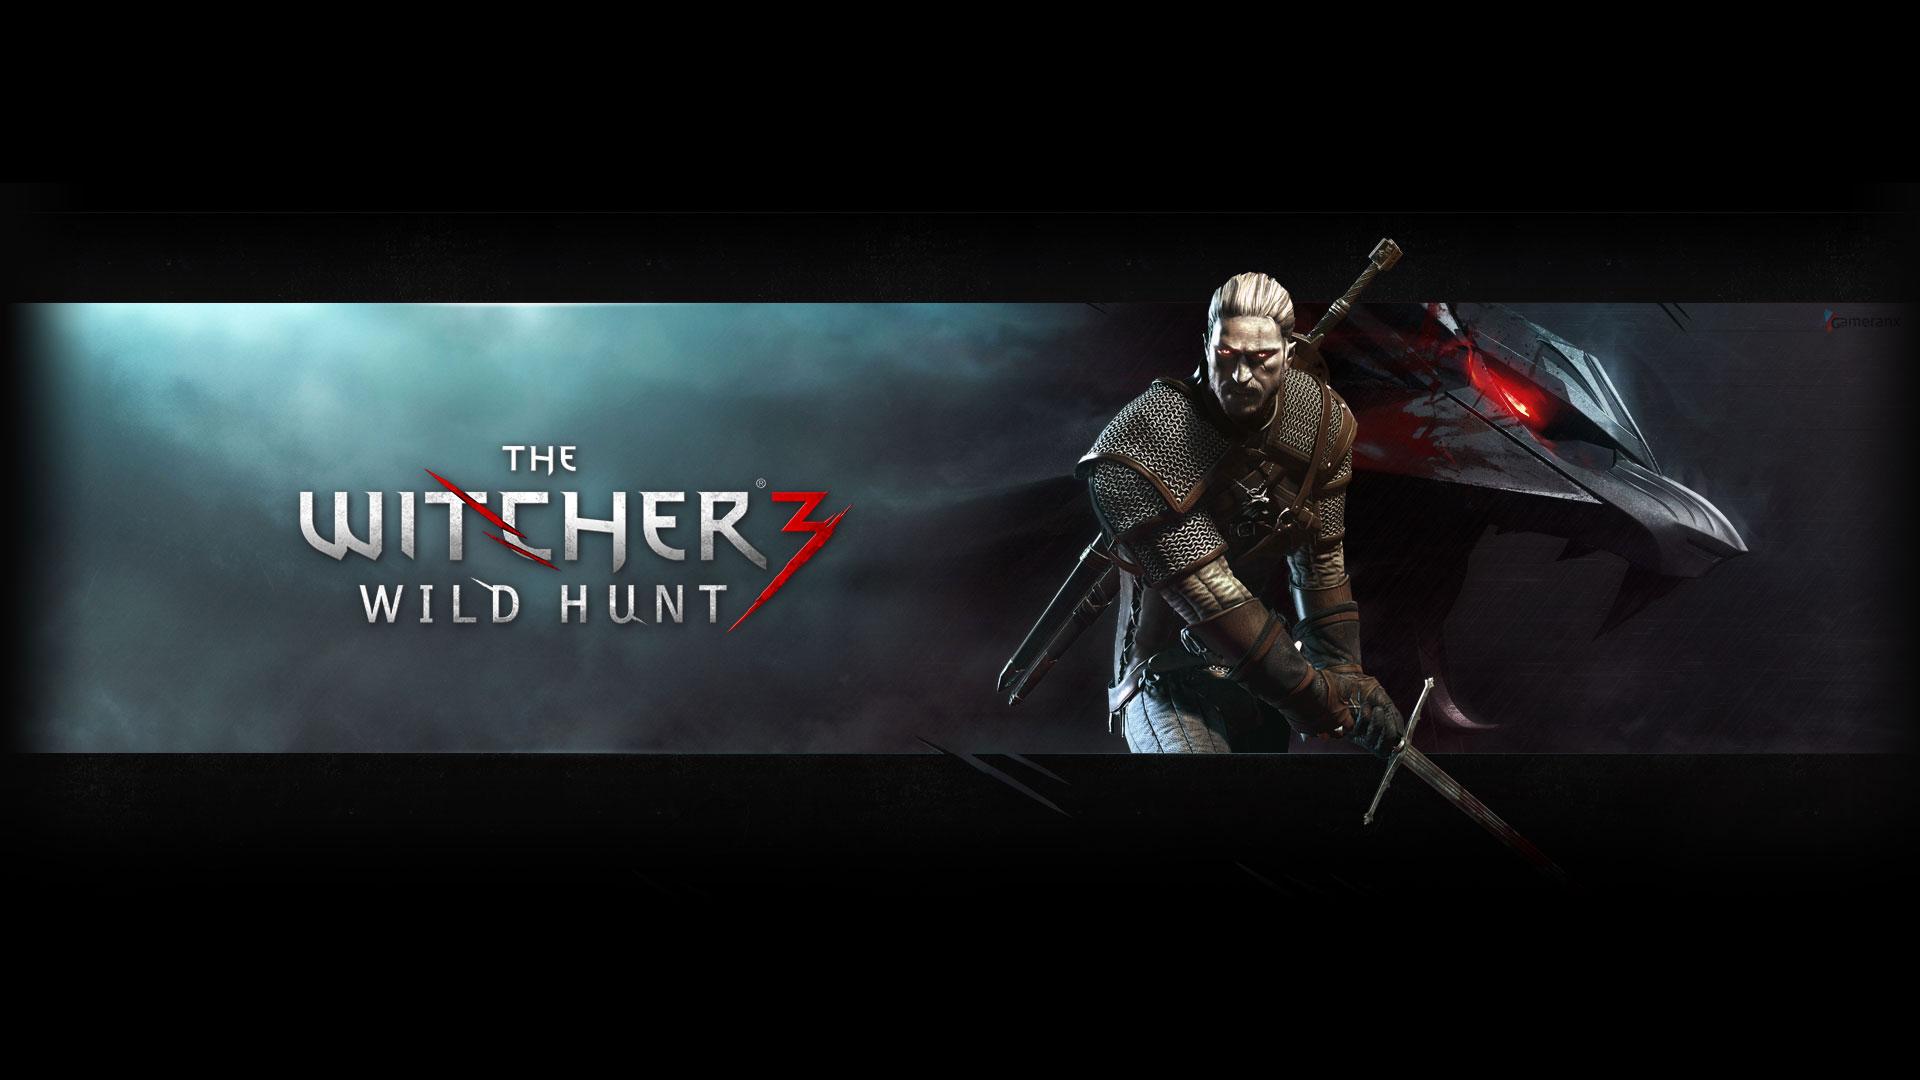 48+] The Witcher 3 Wallpapers 1080p